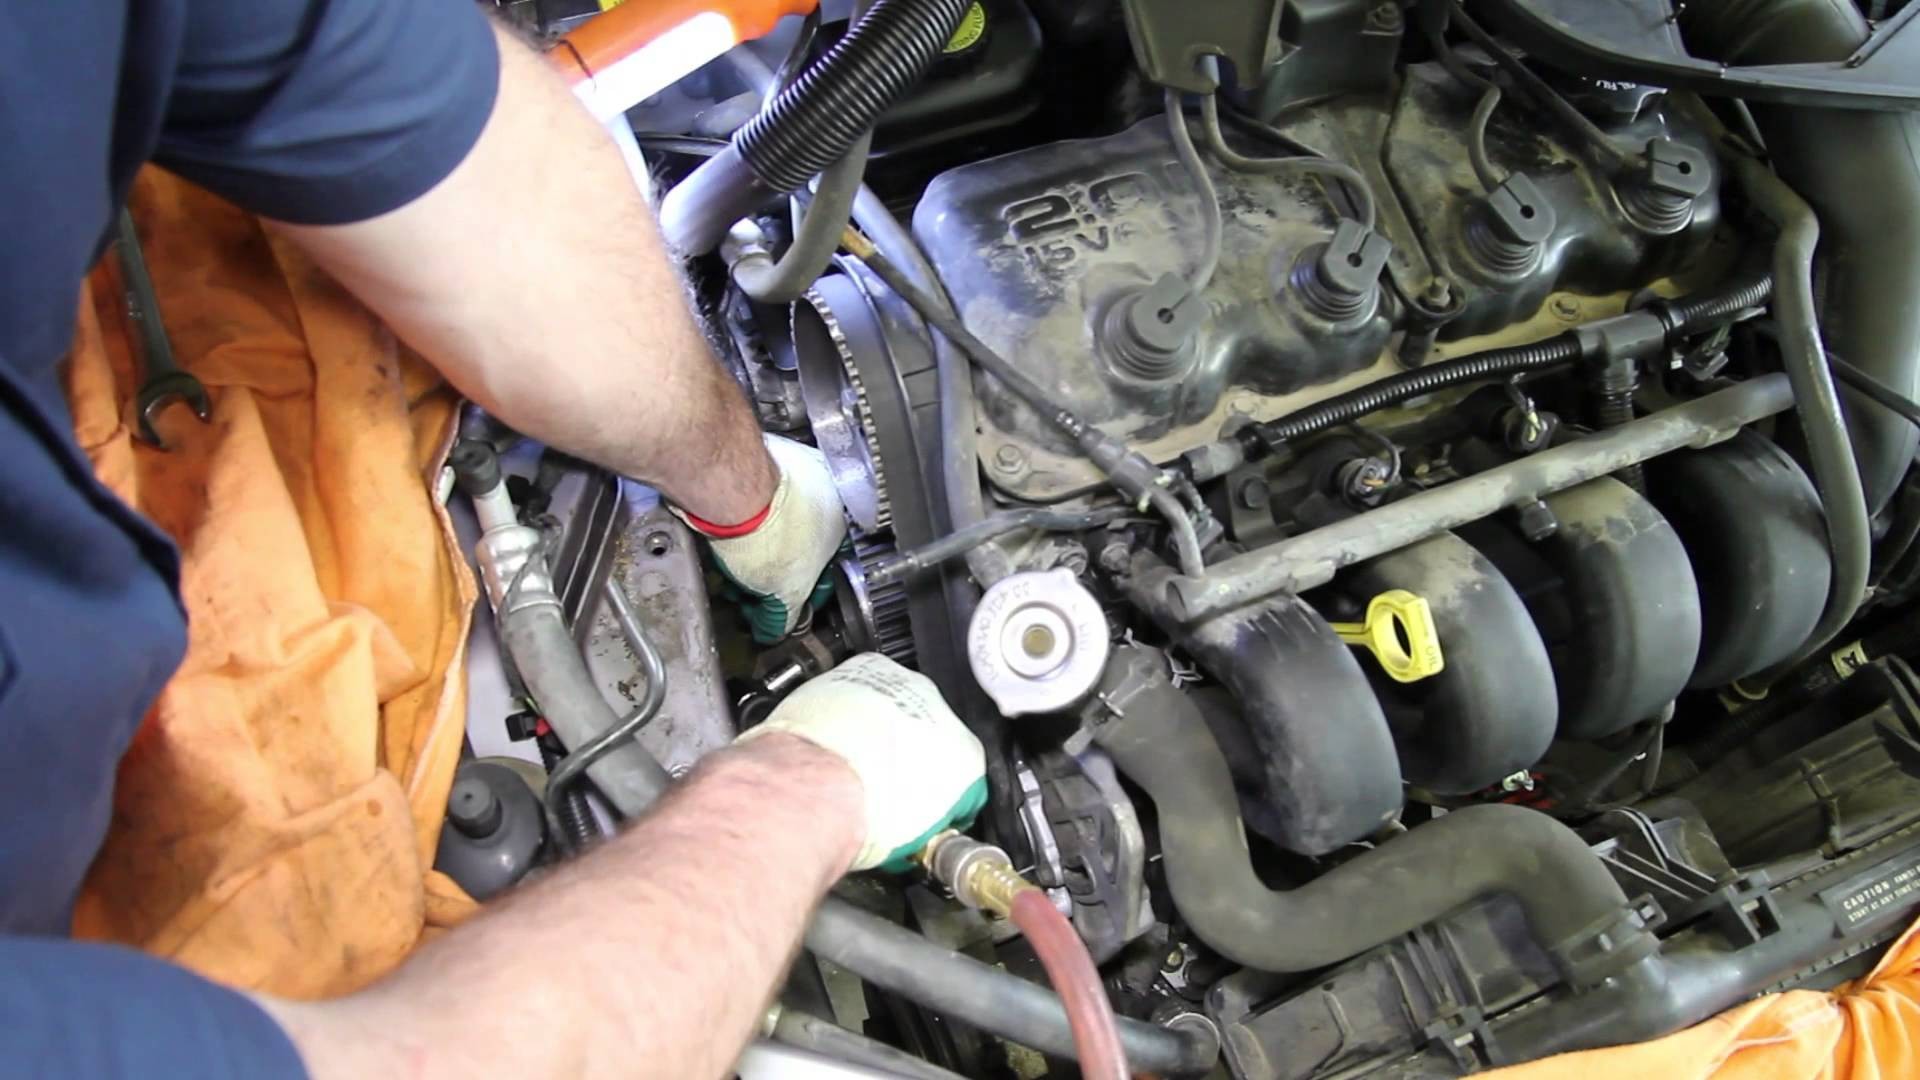 2003 Chrysler Sebring Engine Diagram Wpk 0039 Awk1253 How to Install A Water Pump and Timing Kit Dodge